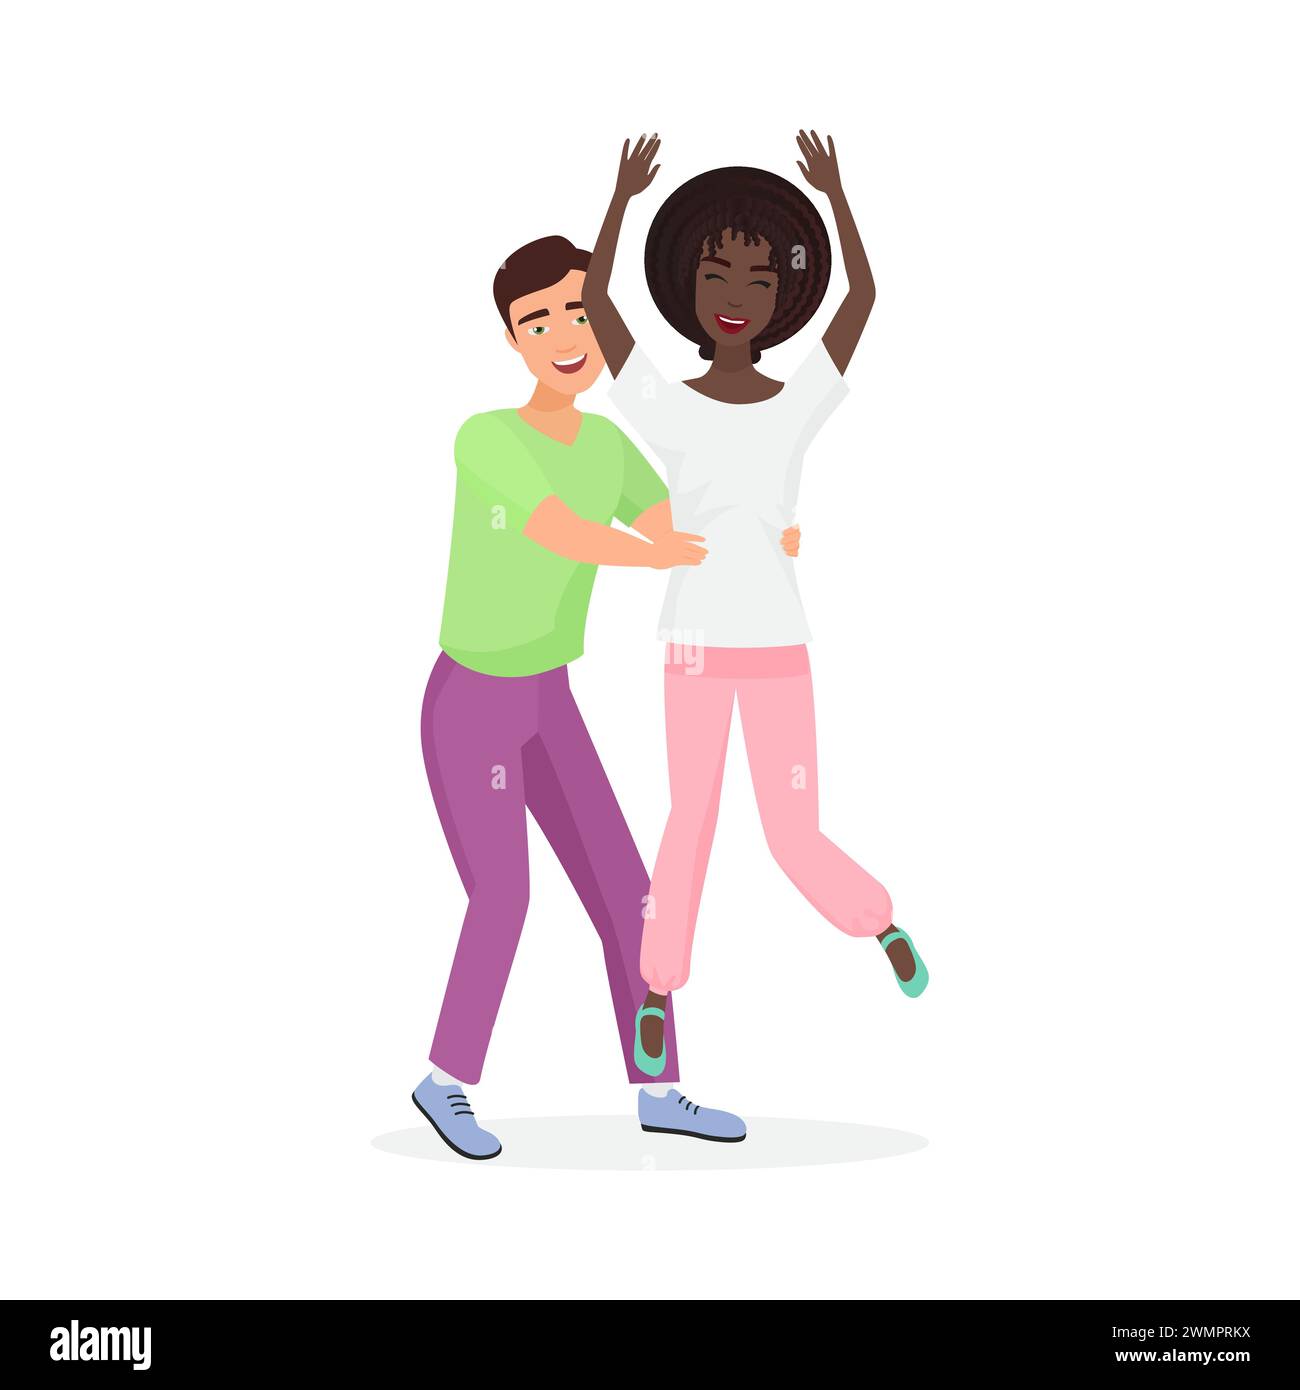 Man holding happy woman by waist while jumping, energetic couple dancing vector illustration Stock Vector